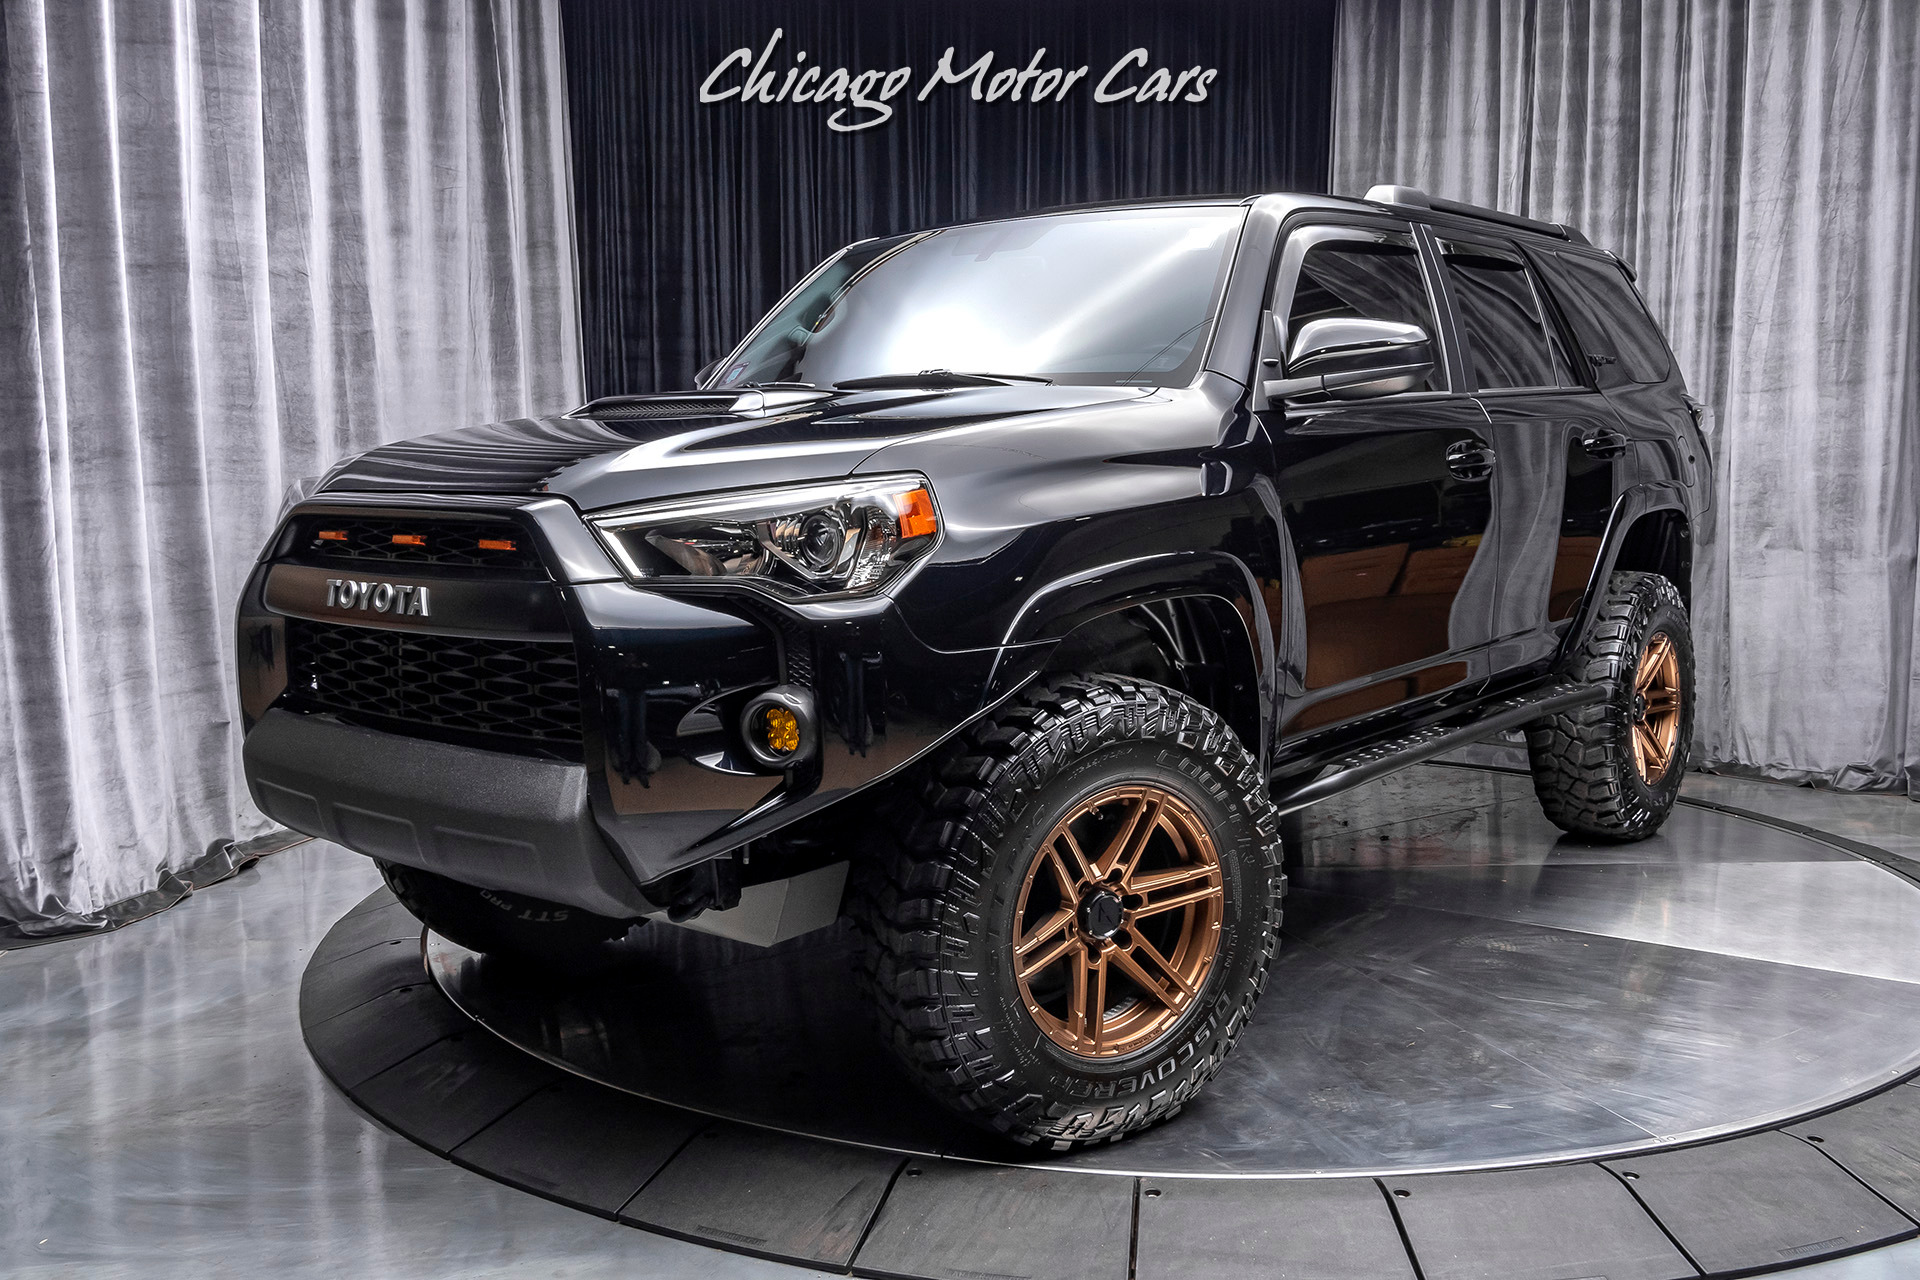 Used 15 Toyota 4runner Trd Pro 4x4 Suv 10k In Upgrades Low Miles Vorsteiner Wheels For Sale Special Pricing Chicago Motor Cars Stock a